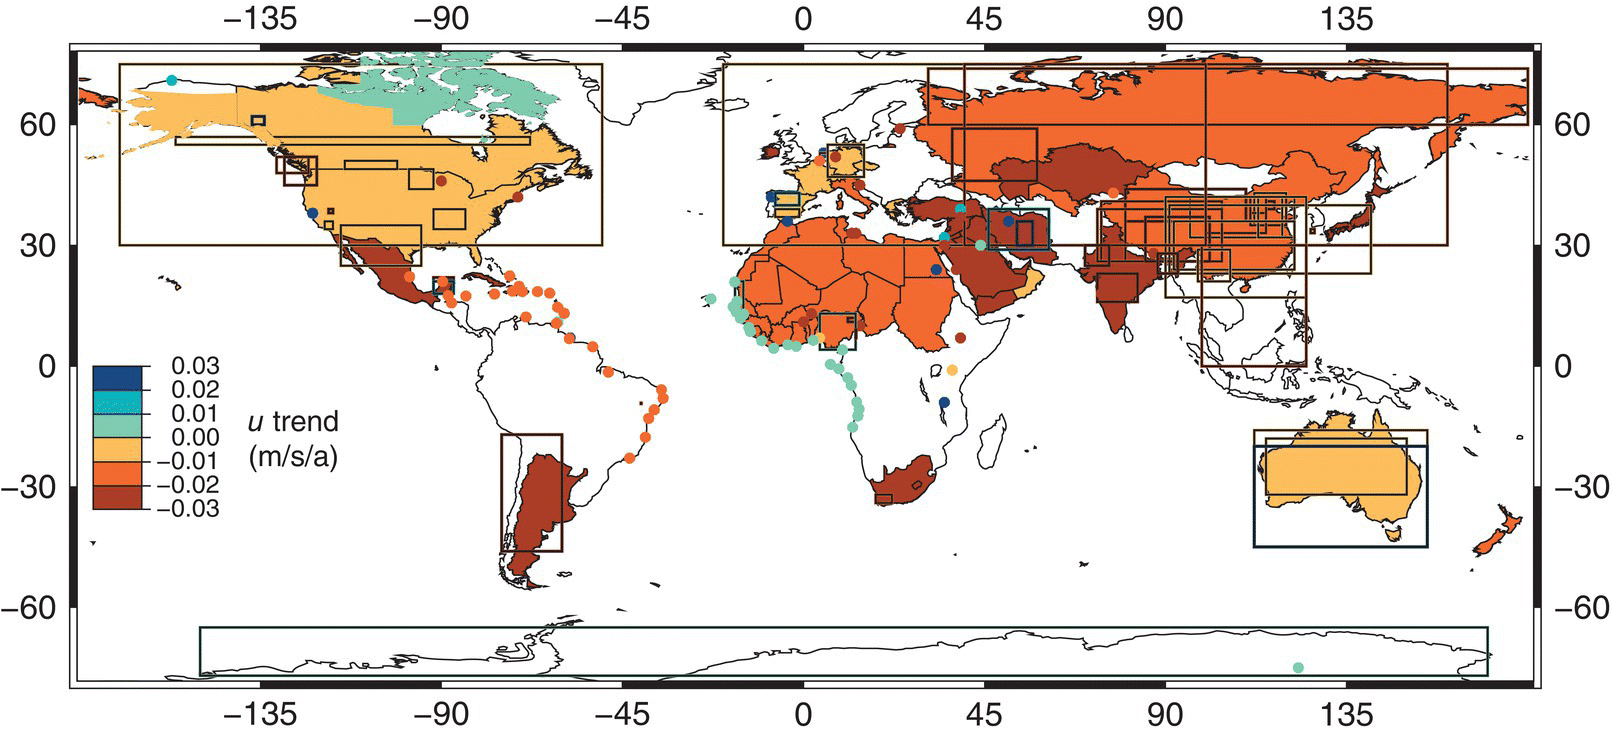 Shaded world map illustrating the trends in observed surface wind speeds (in m/s per annum) with discrete shaded areas corresponding to the scale bar of u trend (m/s/a) on the right.